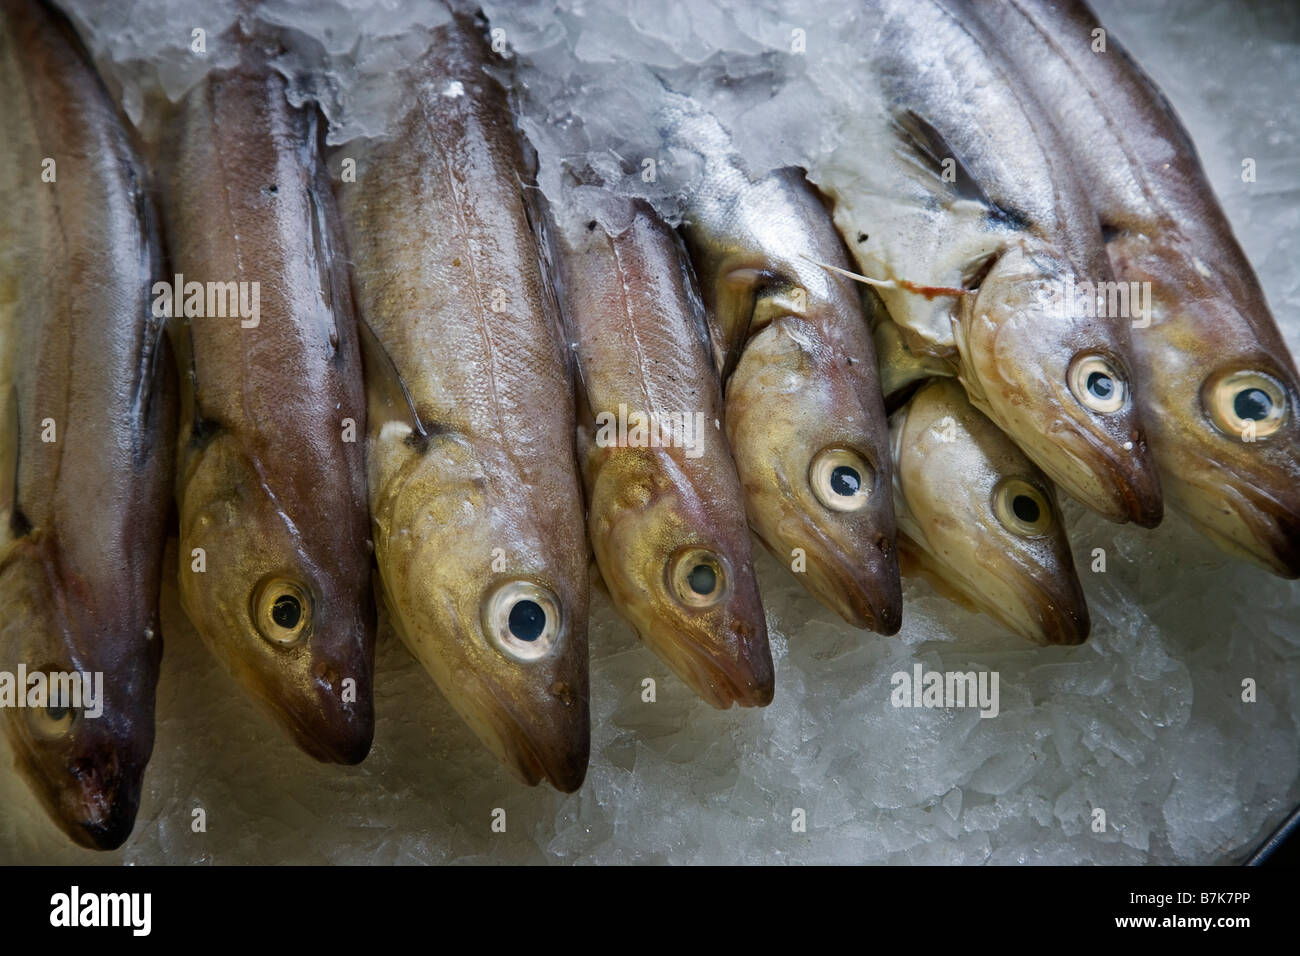 Whiting in ice on a fishmonger's slab in Hastings Sussex UK Stock Photo